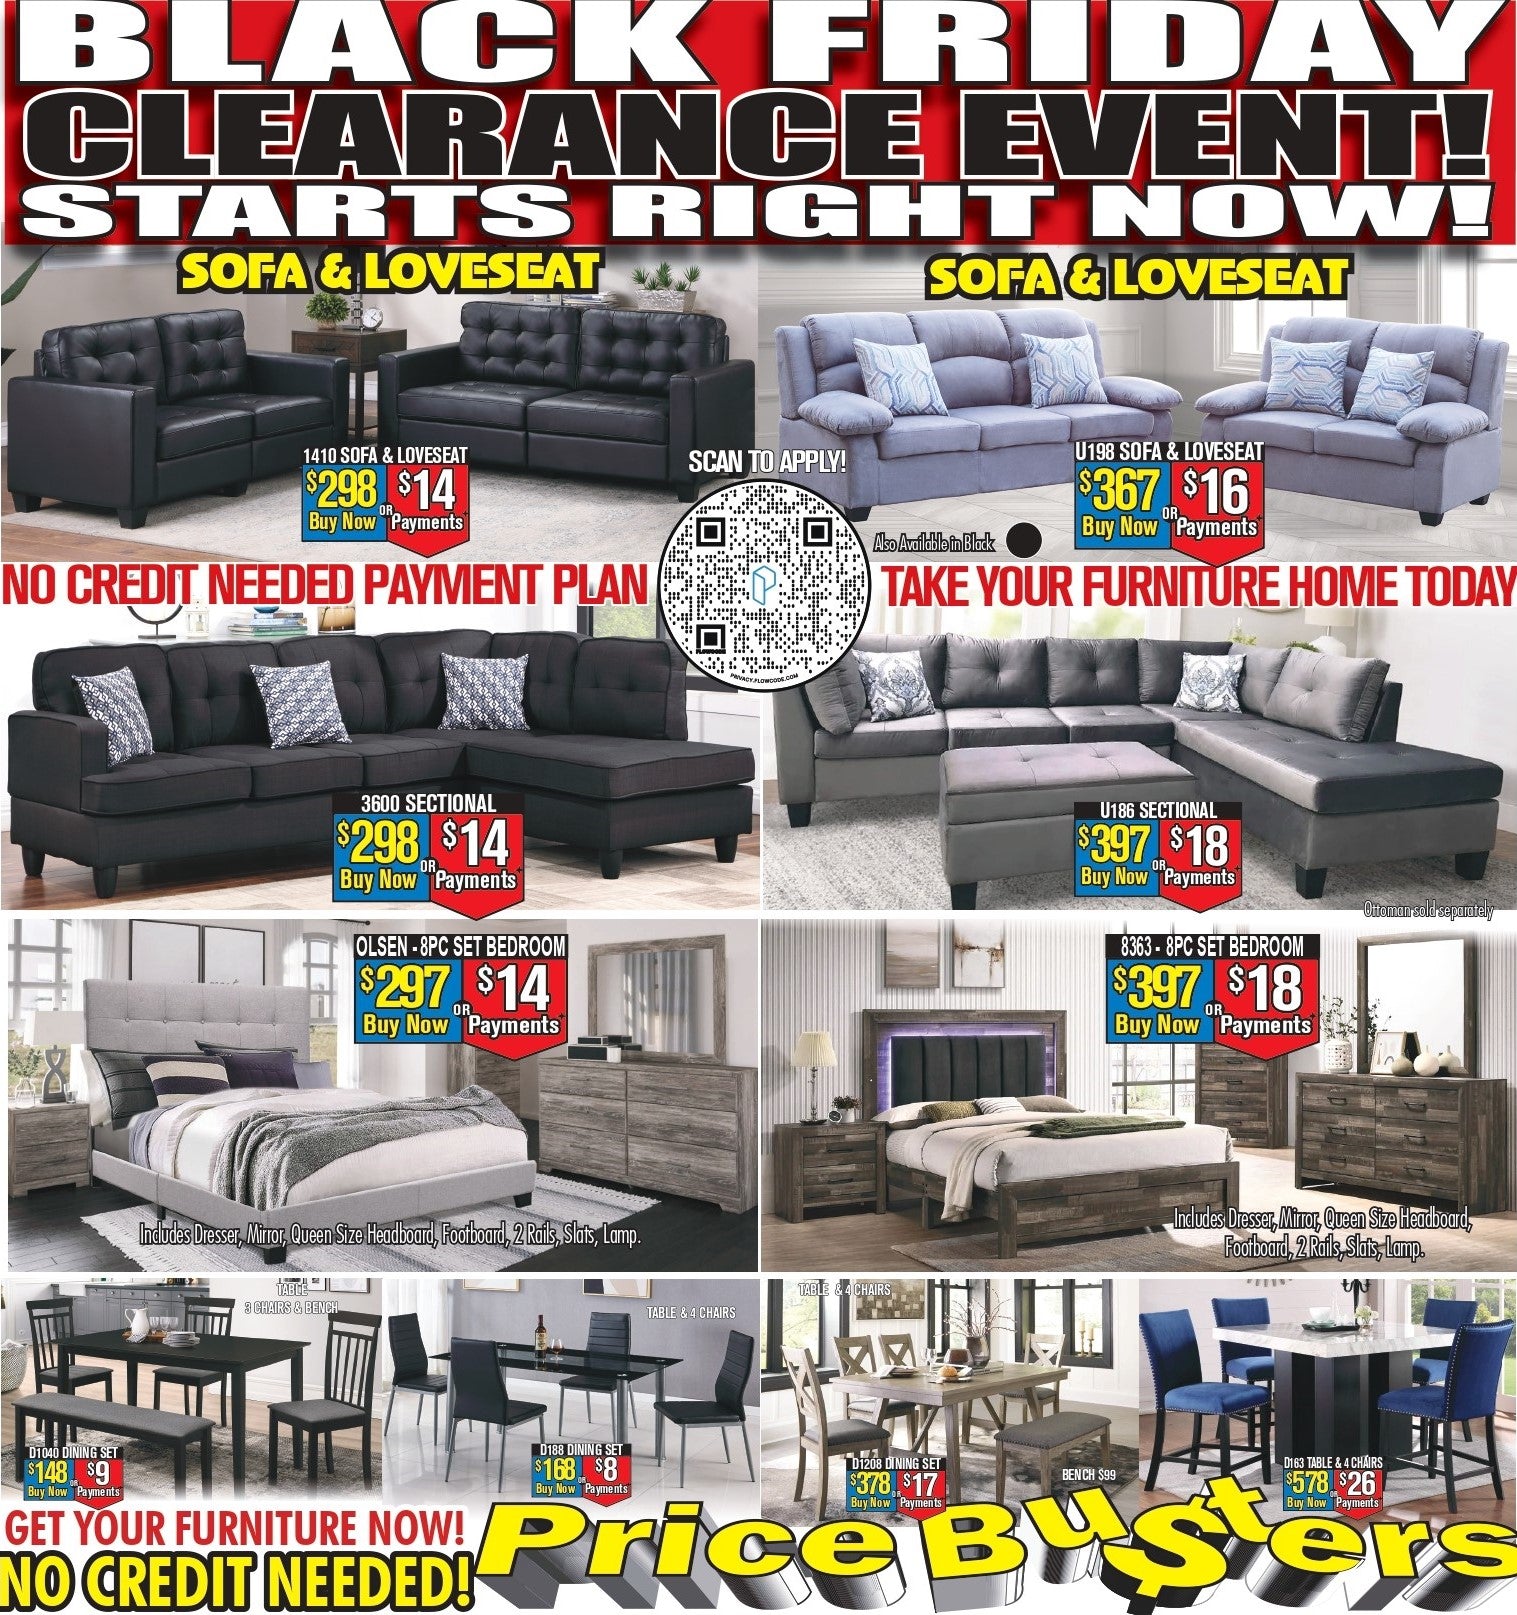 Do Overz Home Consignment Store: For Your Life & Your Style – Do Overz  Furniture & Home Decor Consignment